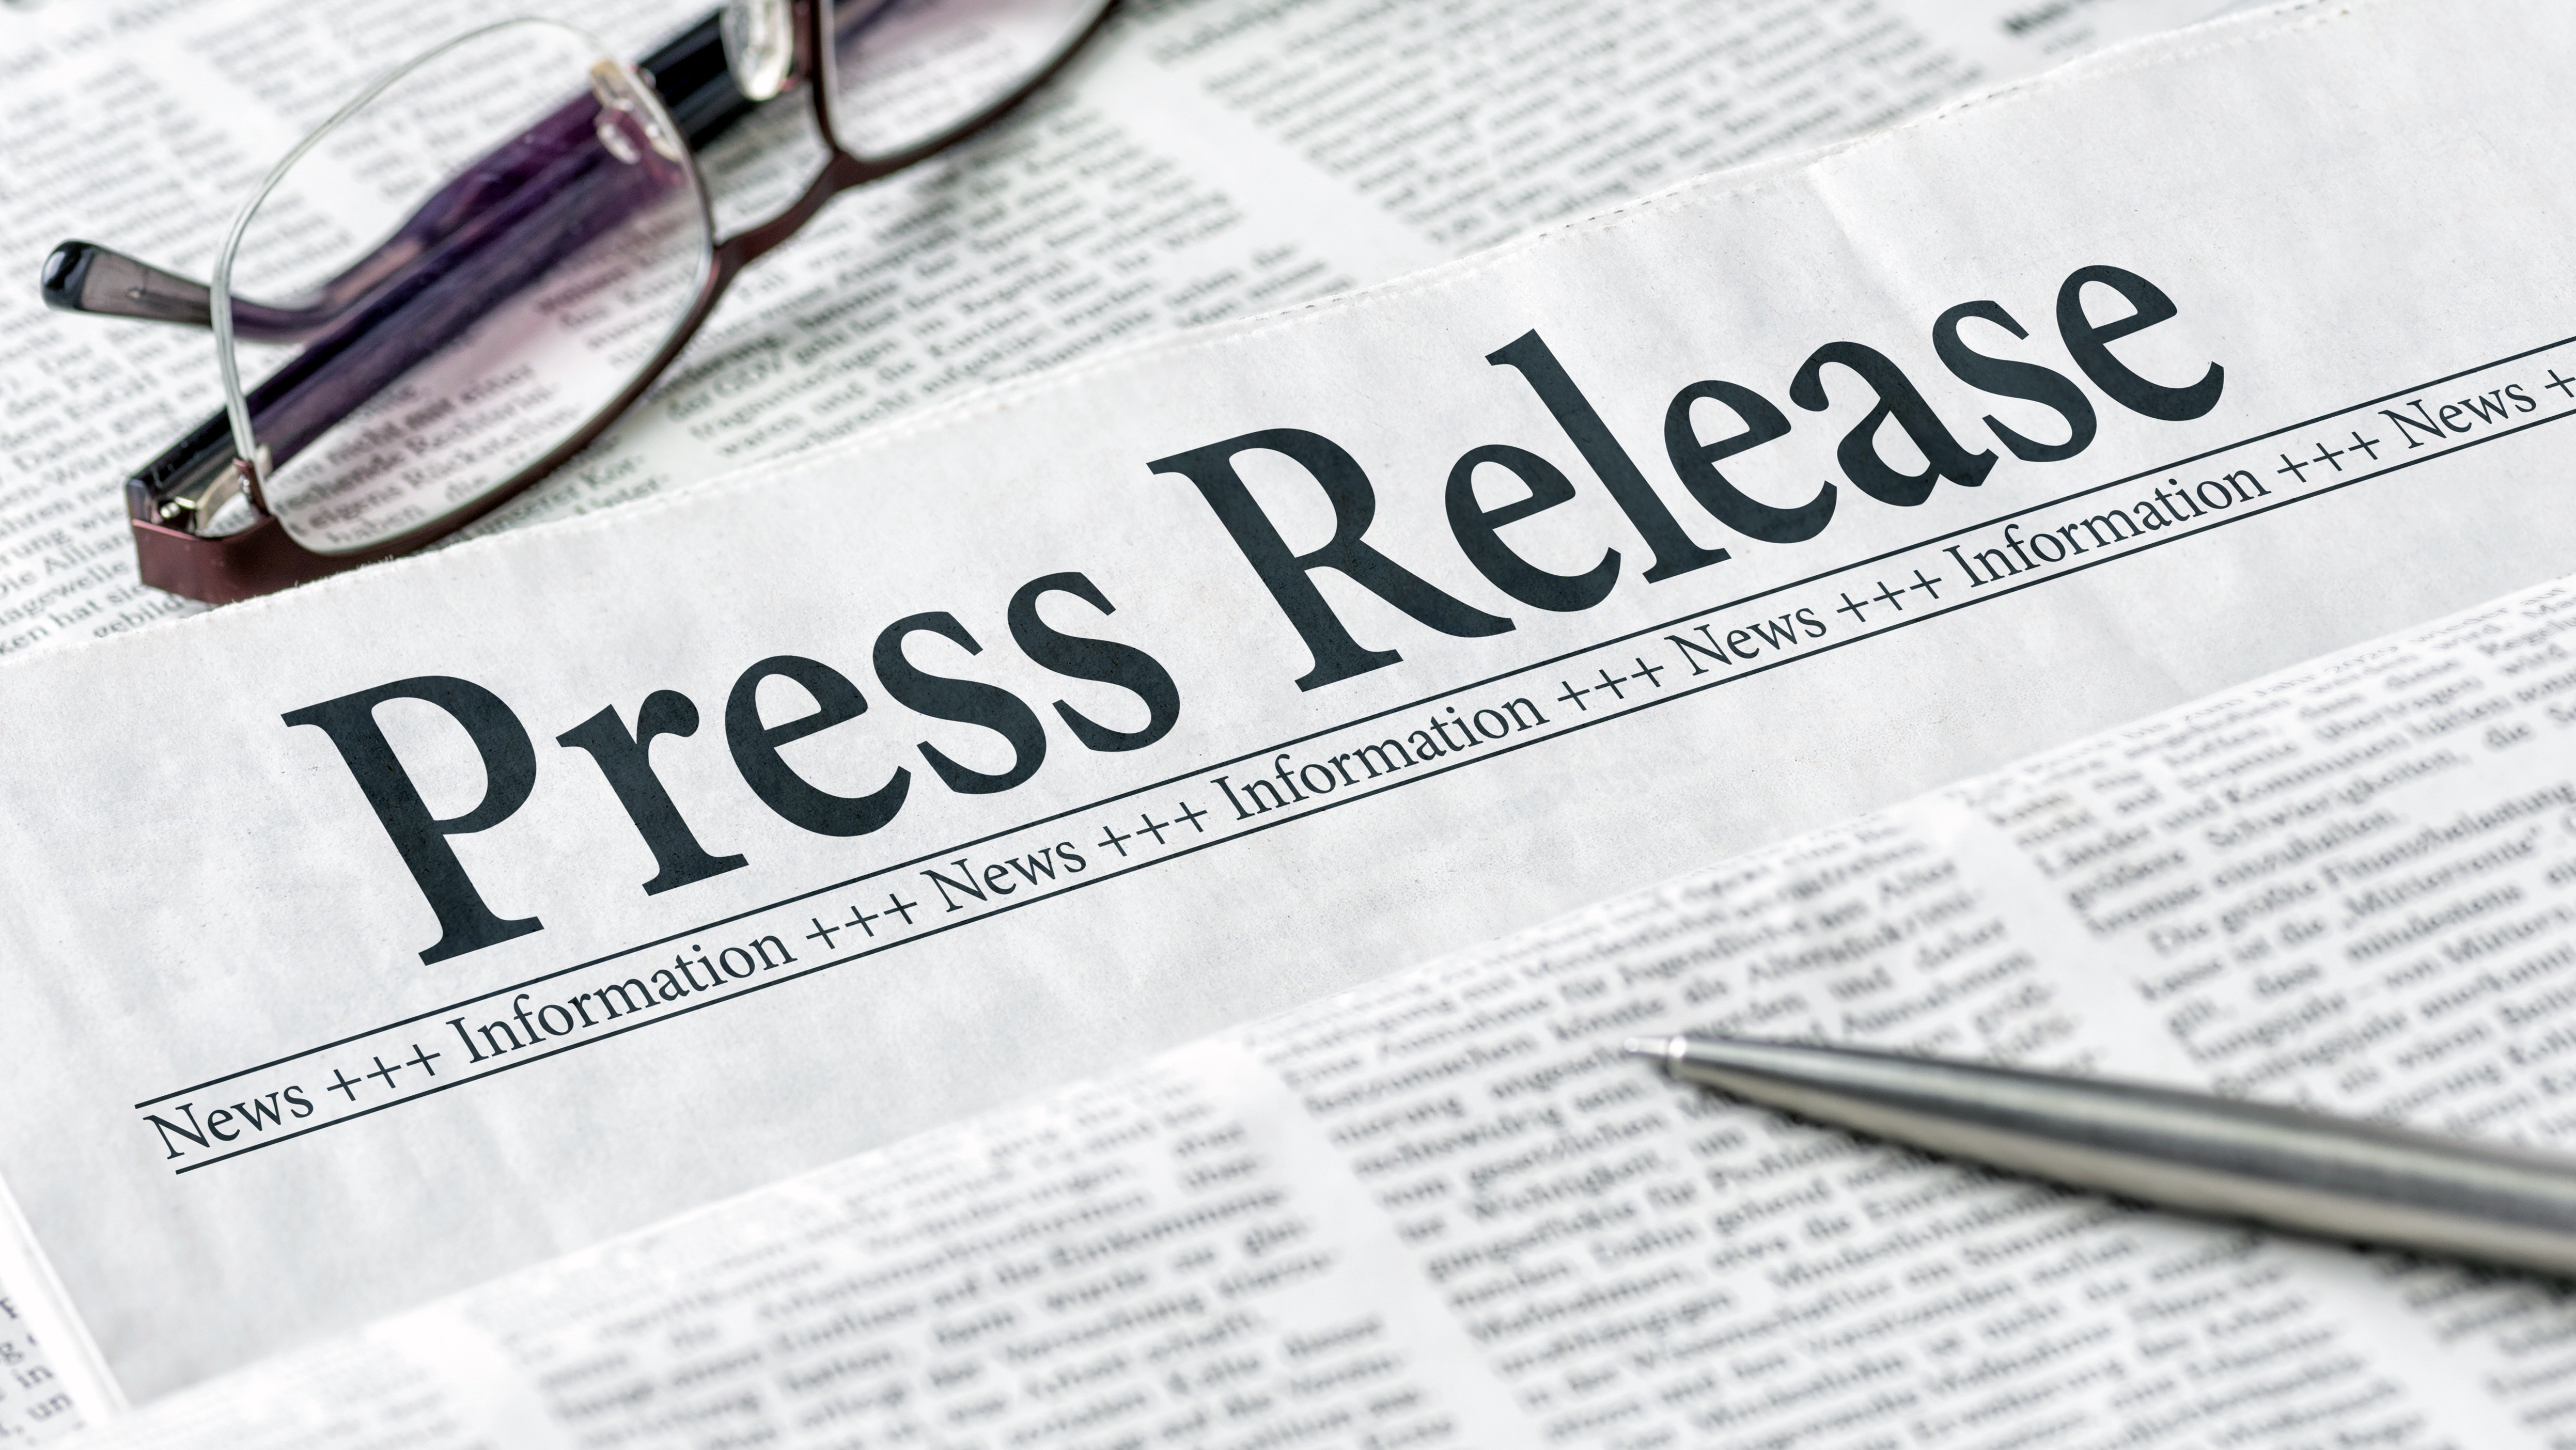 A video press release service that works Writing Effectively for Business